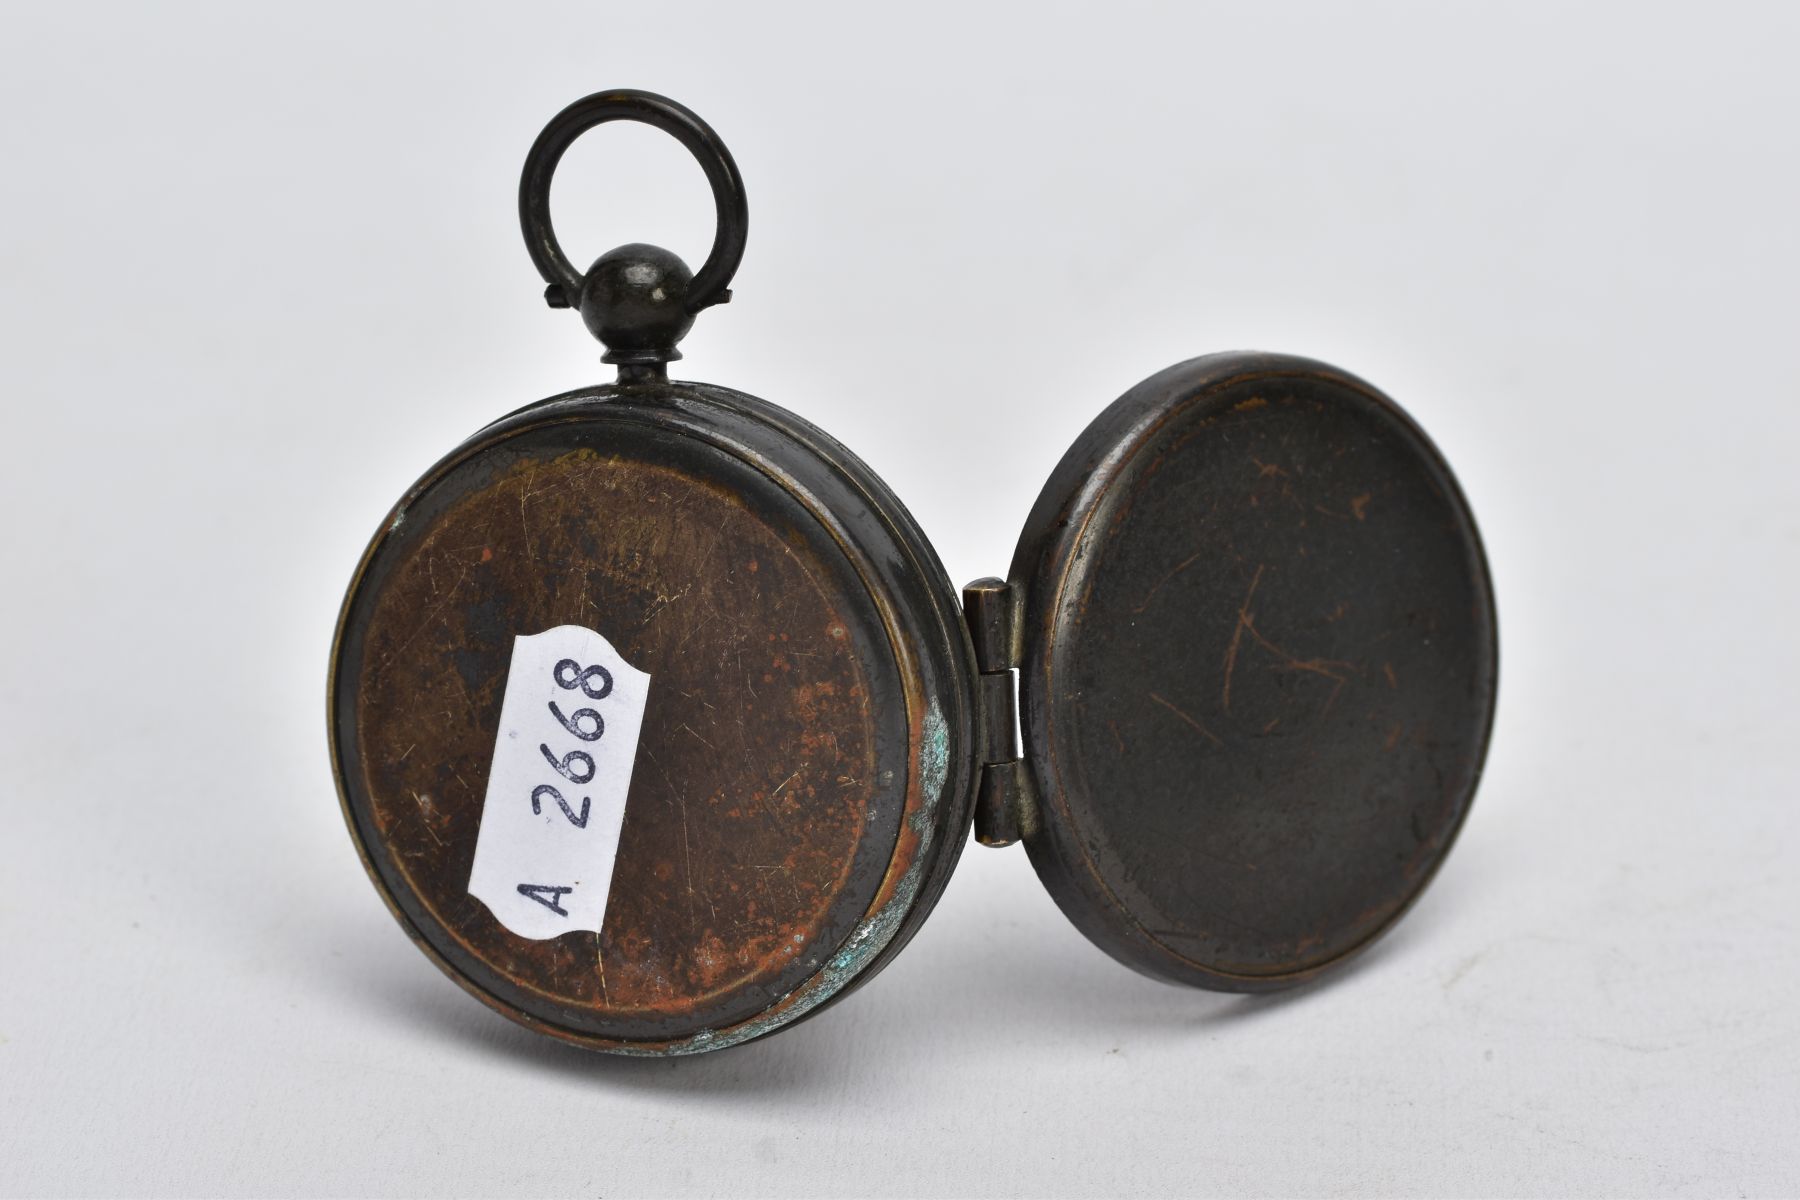 A 'WOOD ABRAHAMS' COMPASS, base metal compass, round mother of pearl dial, signed 'Wood Abrahams - Image 3 of 5